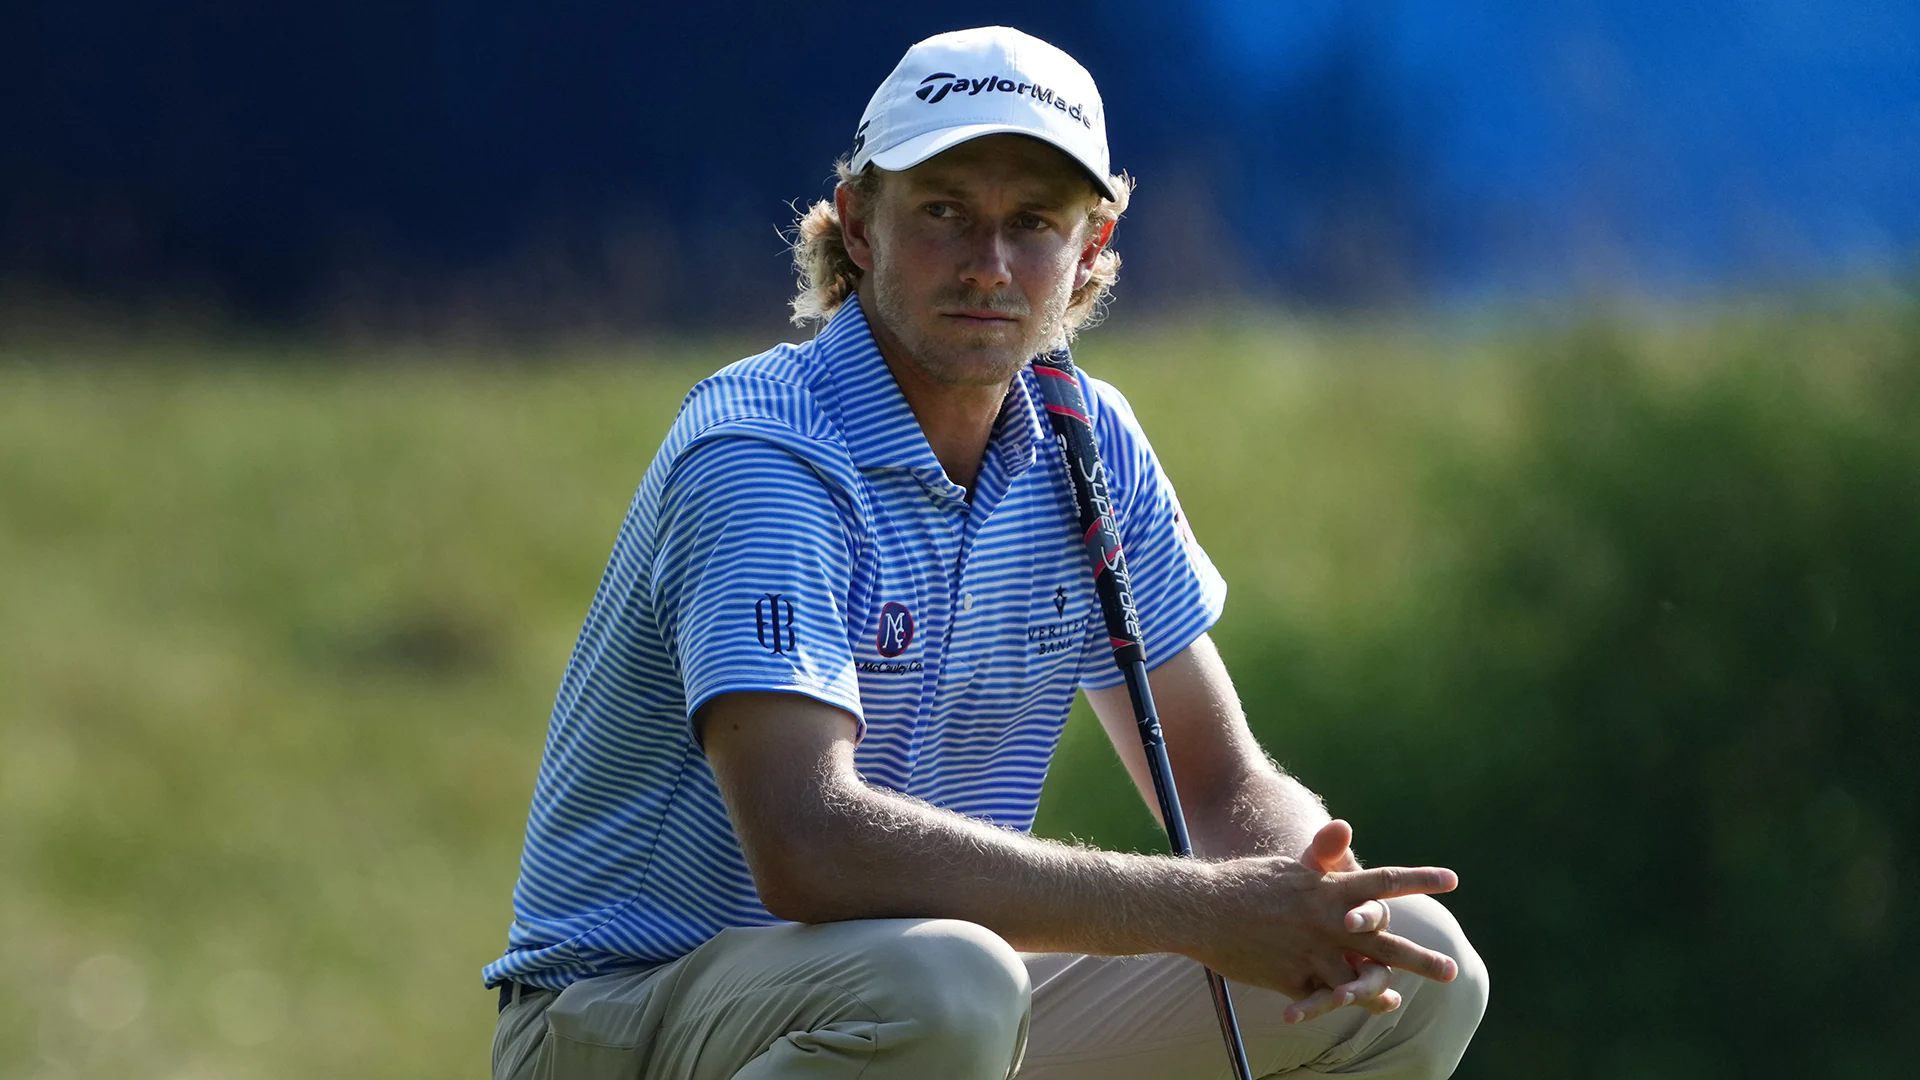 PGA Tour rookie Austin Smotherman doubles last to miss Wyndham cut, likely playoffs